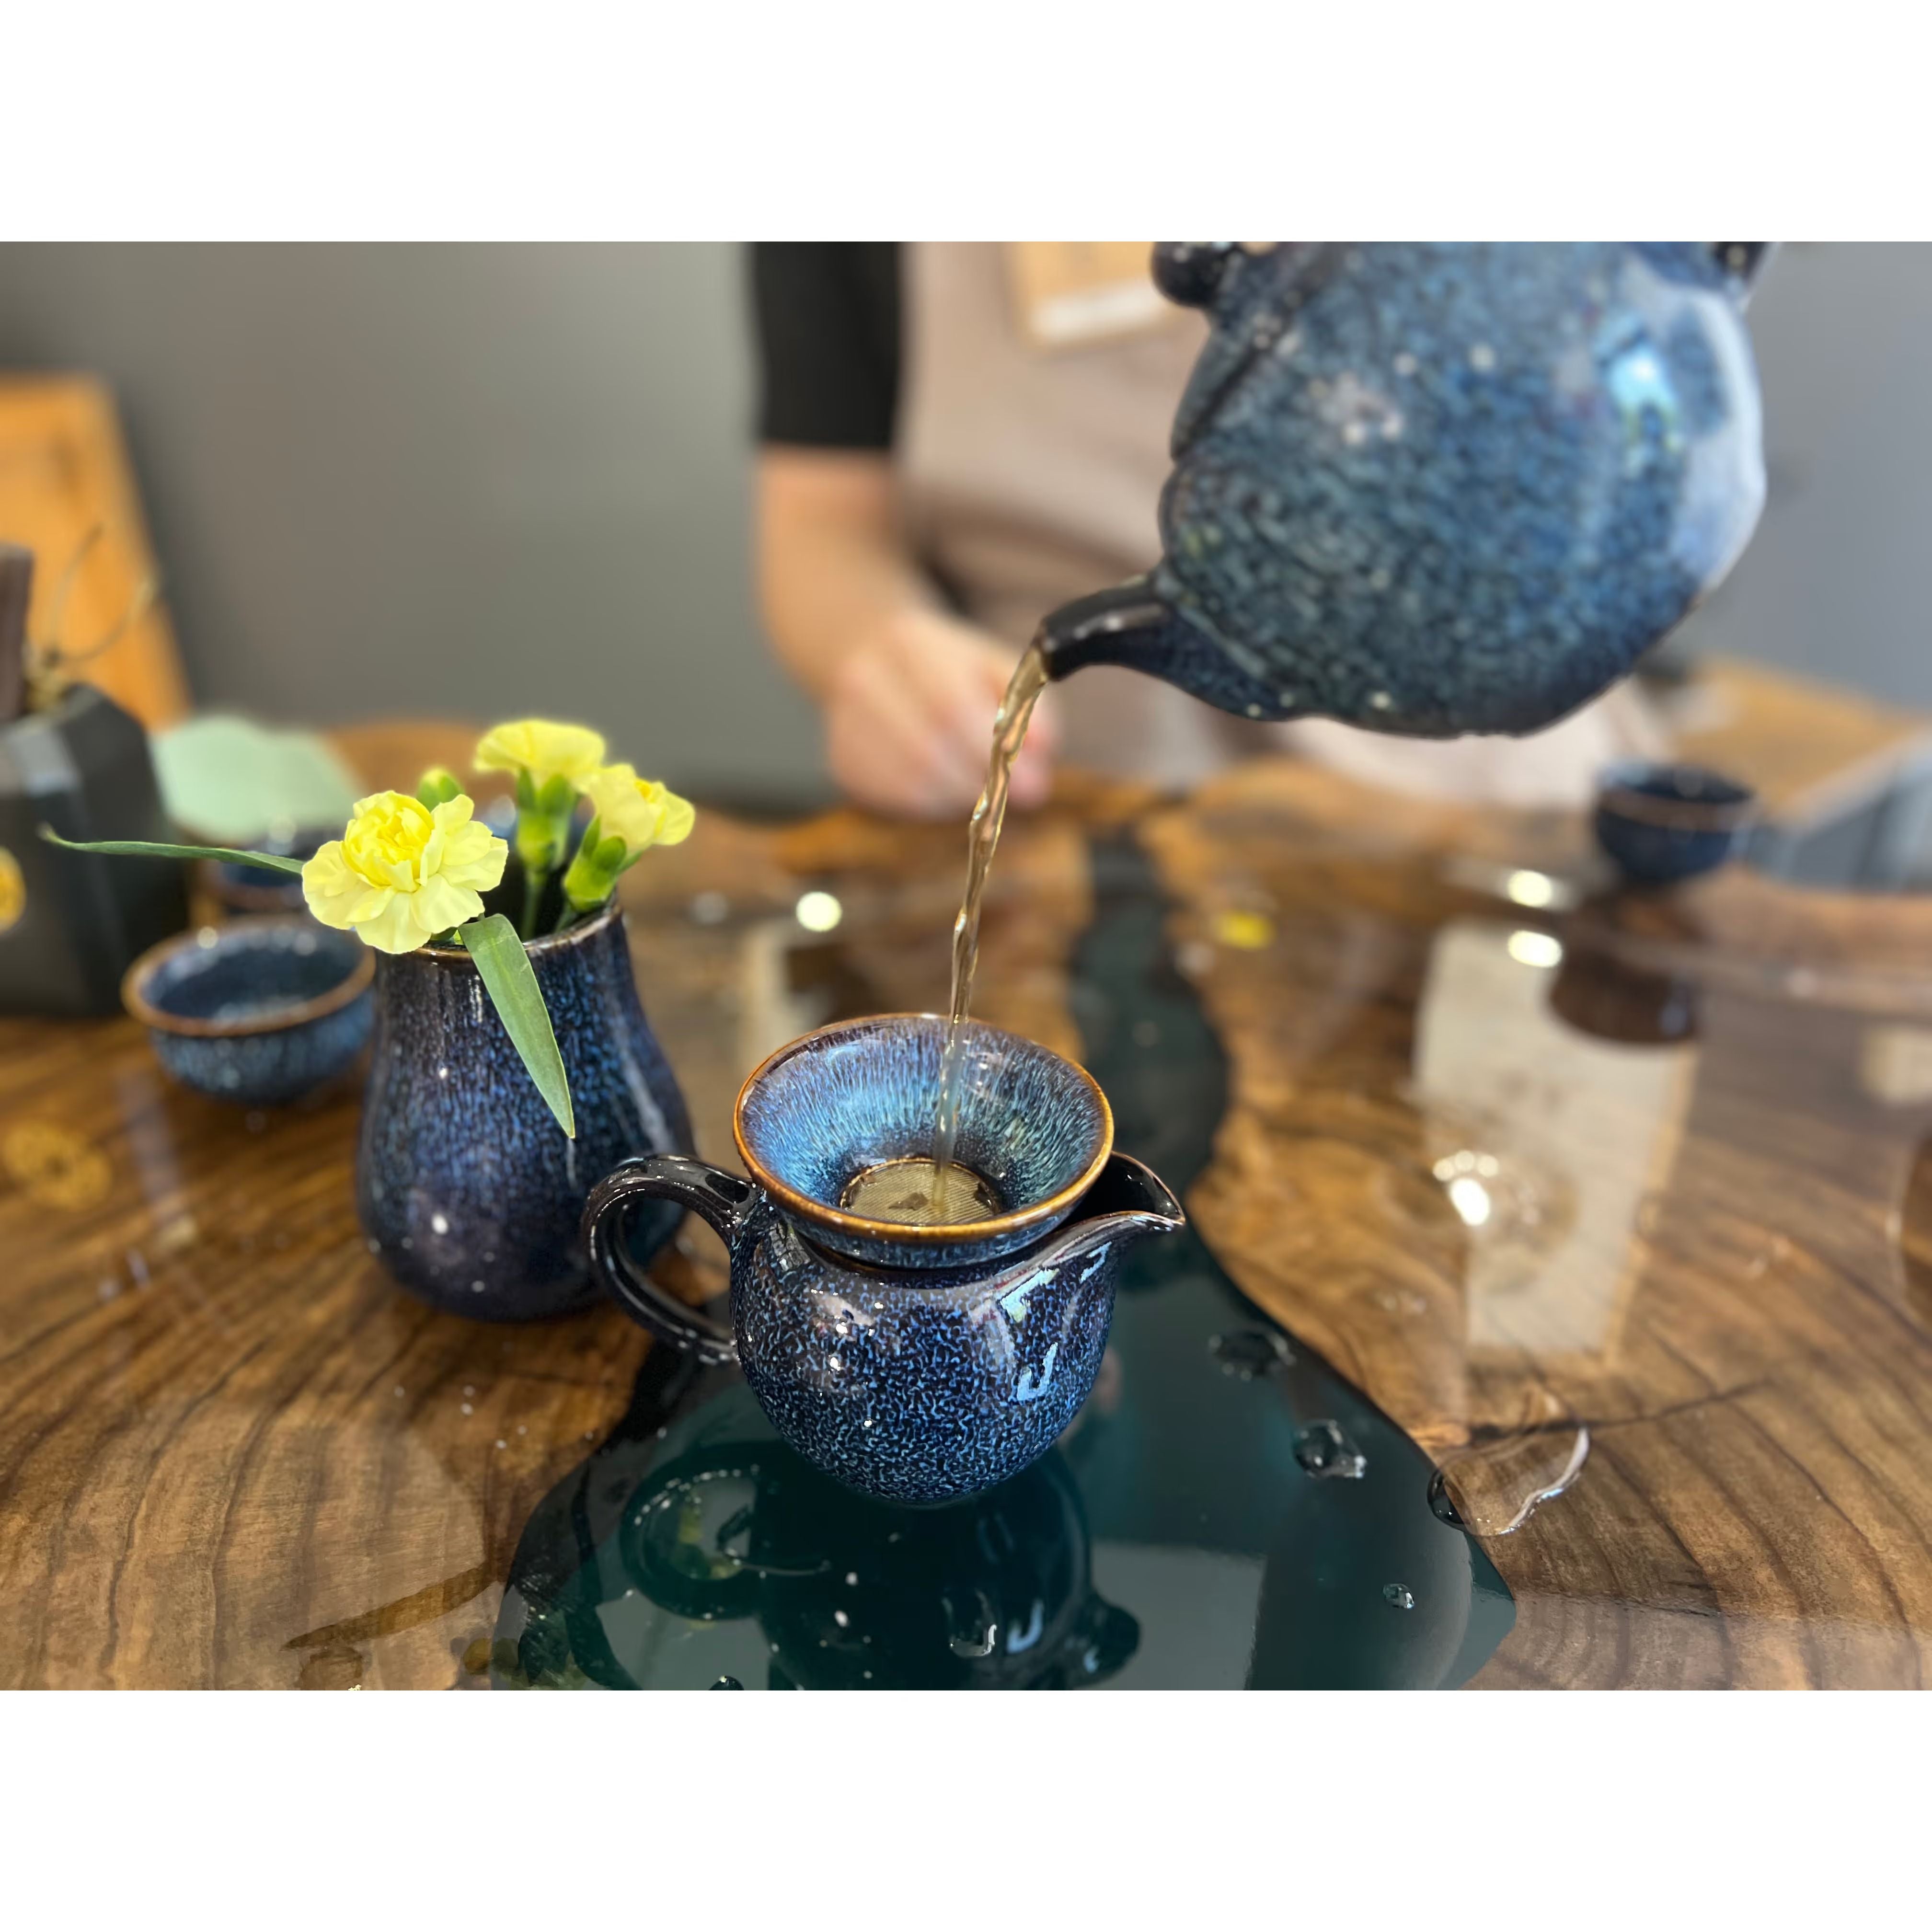 blue glazed sencai teapot pouring artisan tea into matching fair cup next to yellow flowers in matching vase on artisan wood and blue resin tea table with water droplets